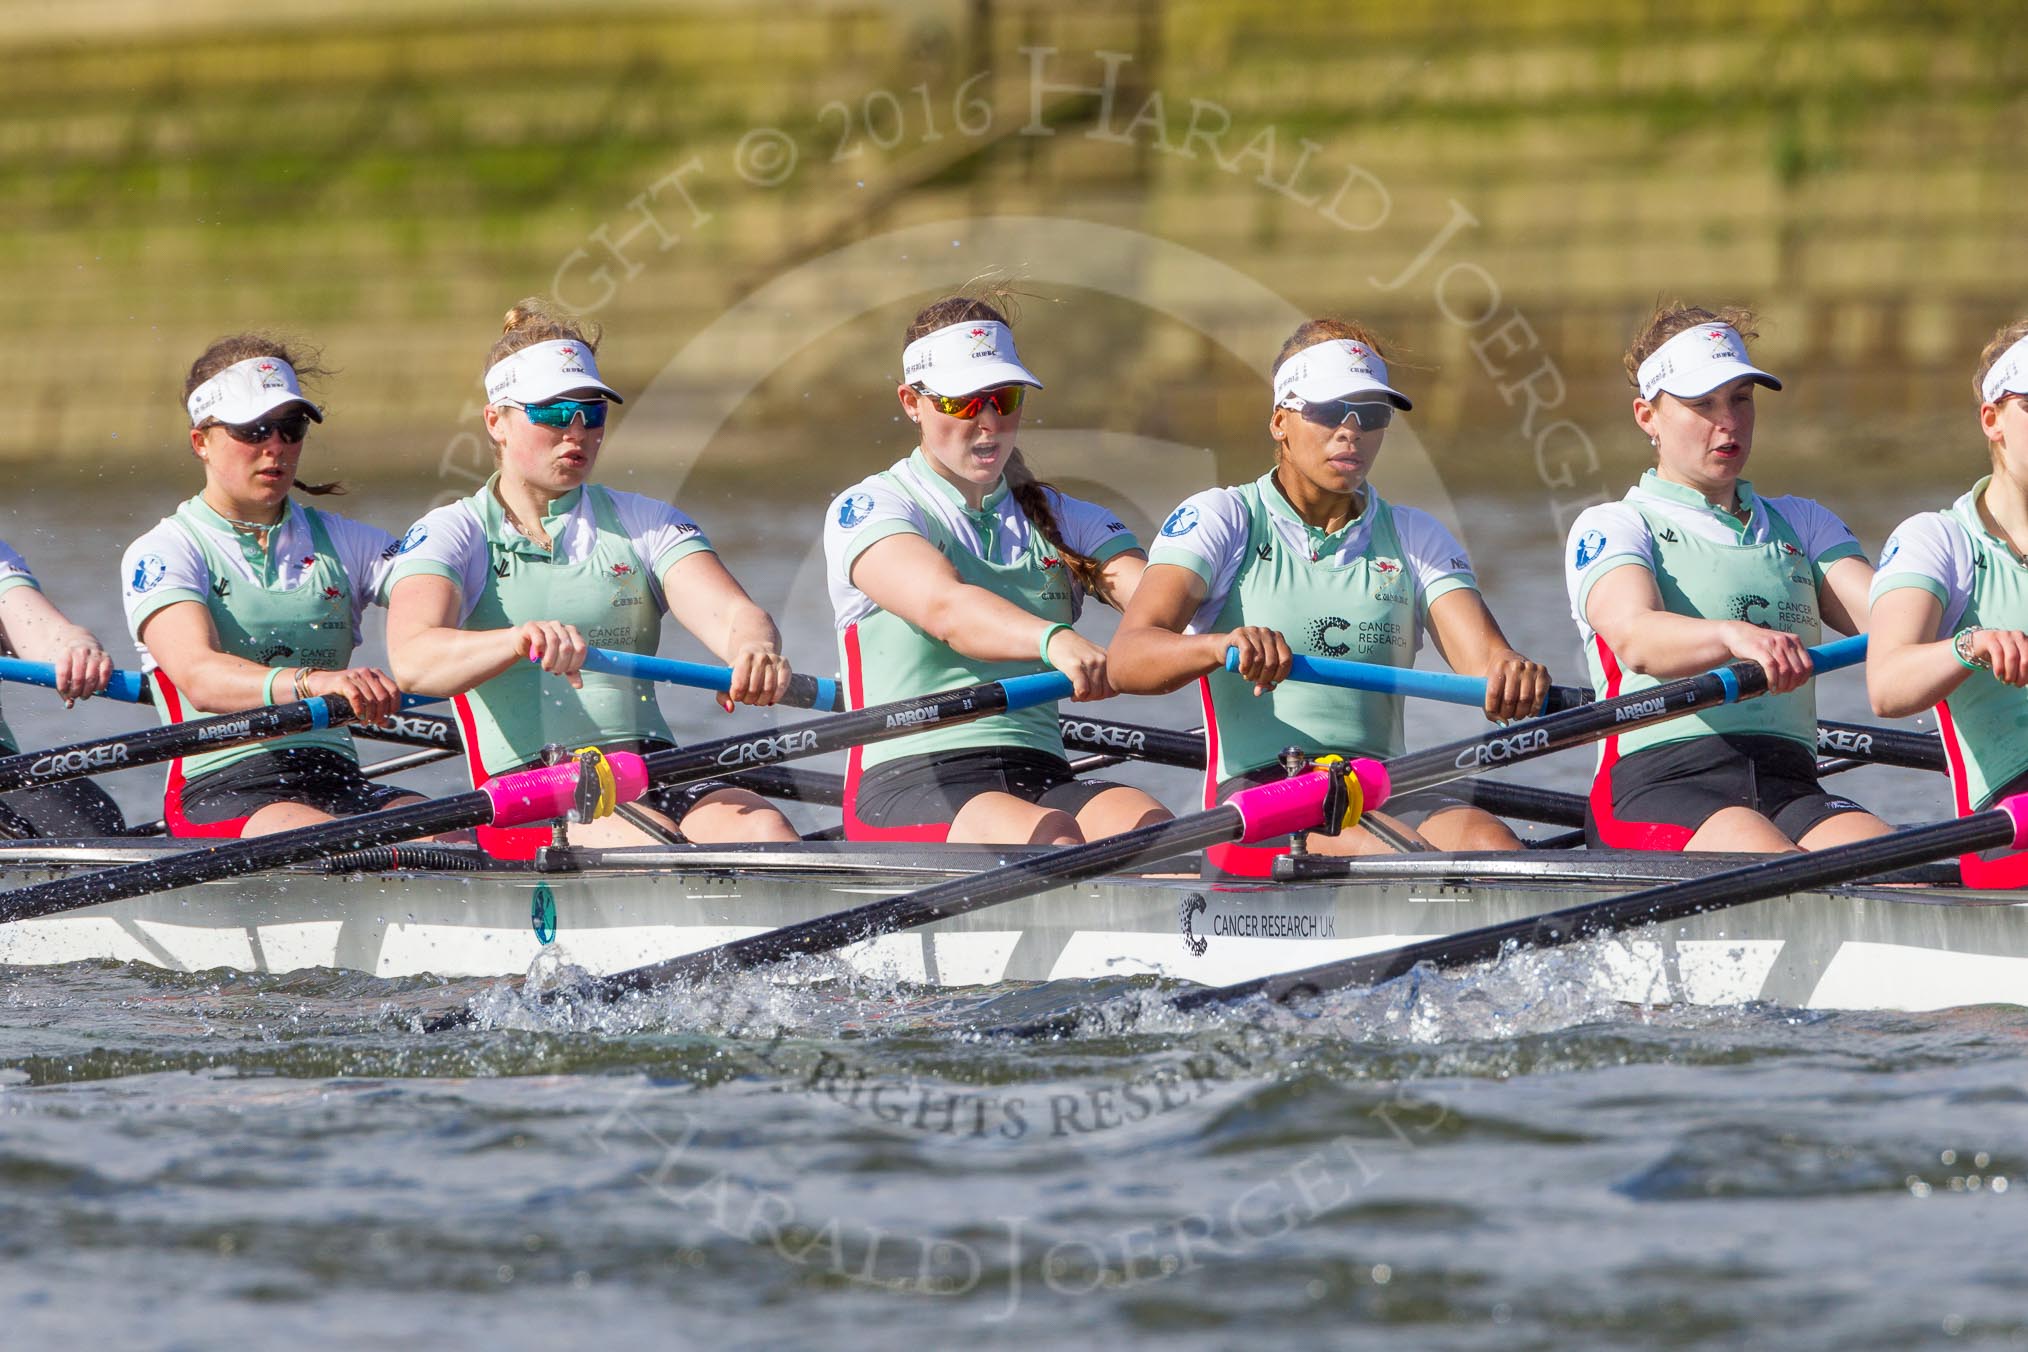 The Boat Race season 2016 -  The Cancer Research Women's Boat Race.
River Thames between Putney Bridge and Mortlake,
London SW15,

United Kingdom,
on 27 March 2016 at 14:11, image #184